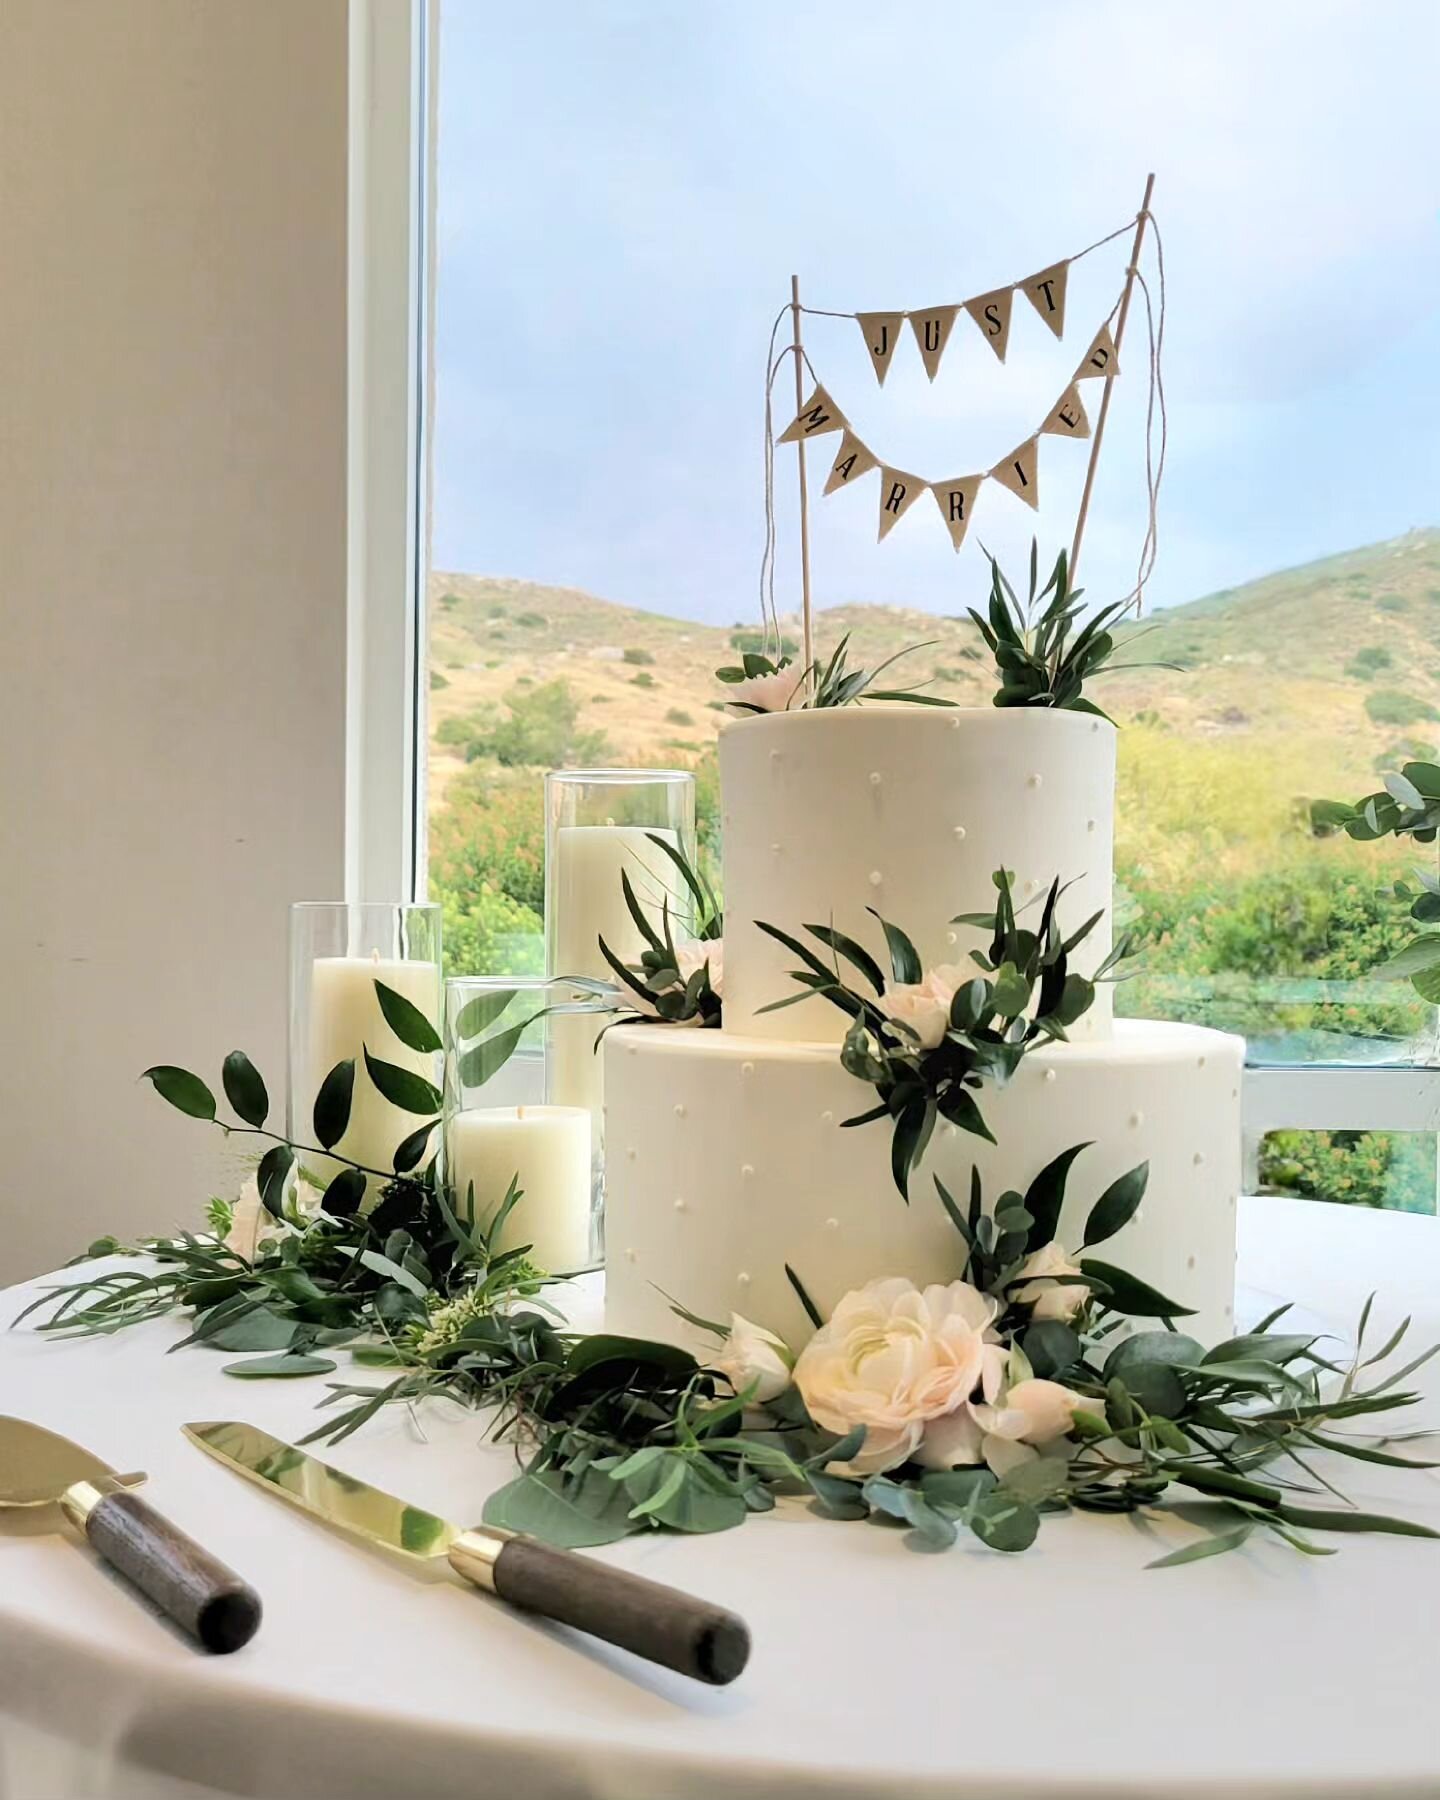 #WeddingCake The sweetest part of Decor. @tastefulcakes  always creates the lovelest cakes, It's always a pleasure to accent their beautiful designs. 
Venue @hiddenvalleygolf 
Florist @lovelyambiance 
#CakeFlowers #Cake #View #HiddenValley #NorcoCa